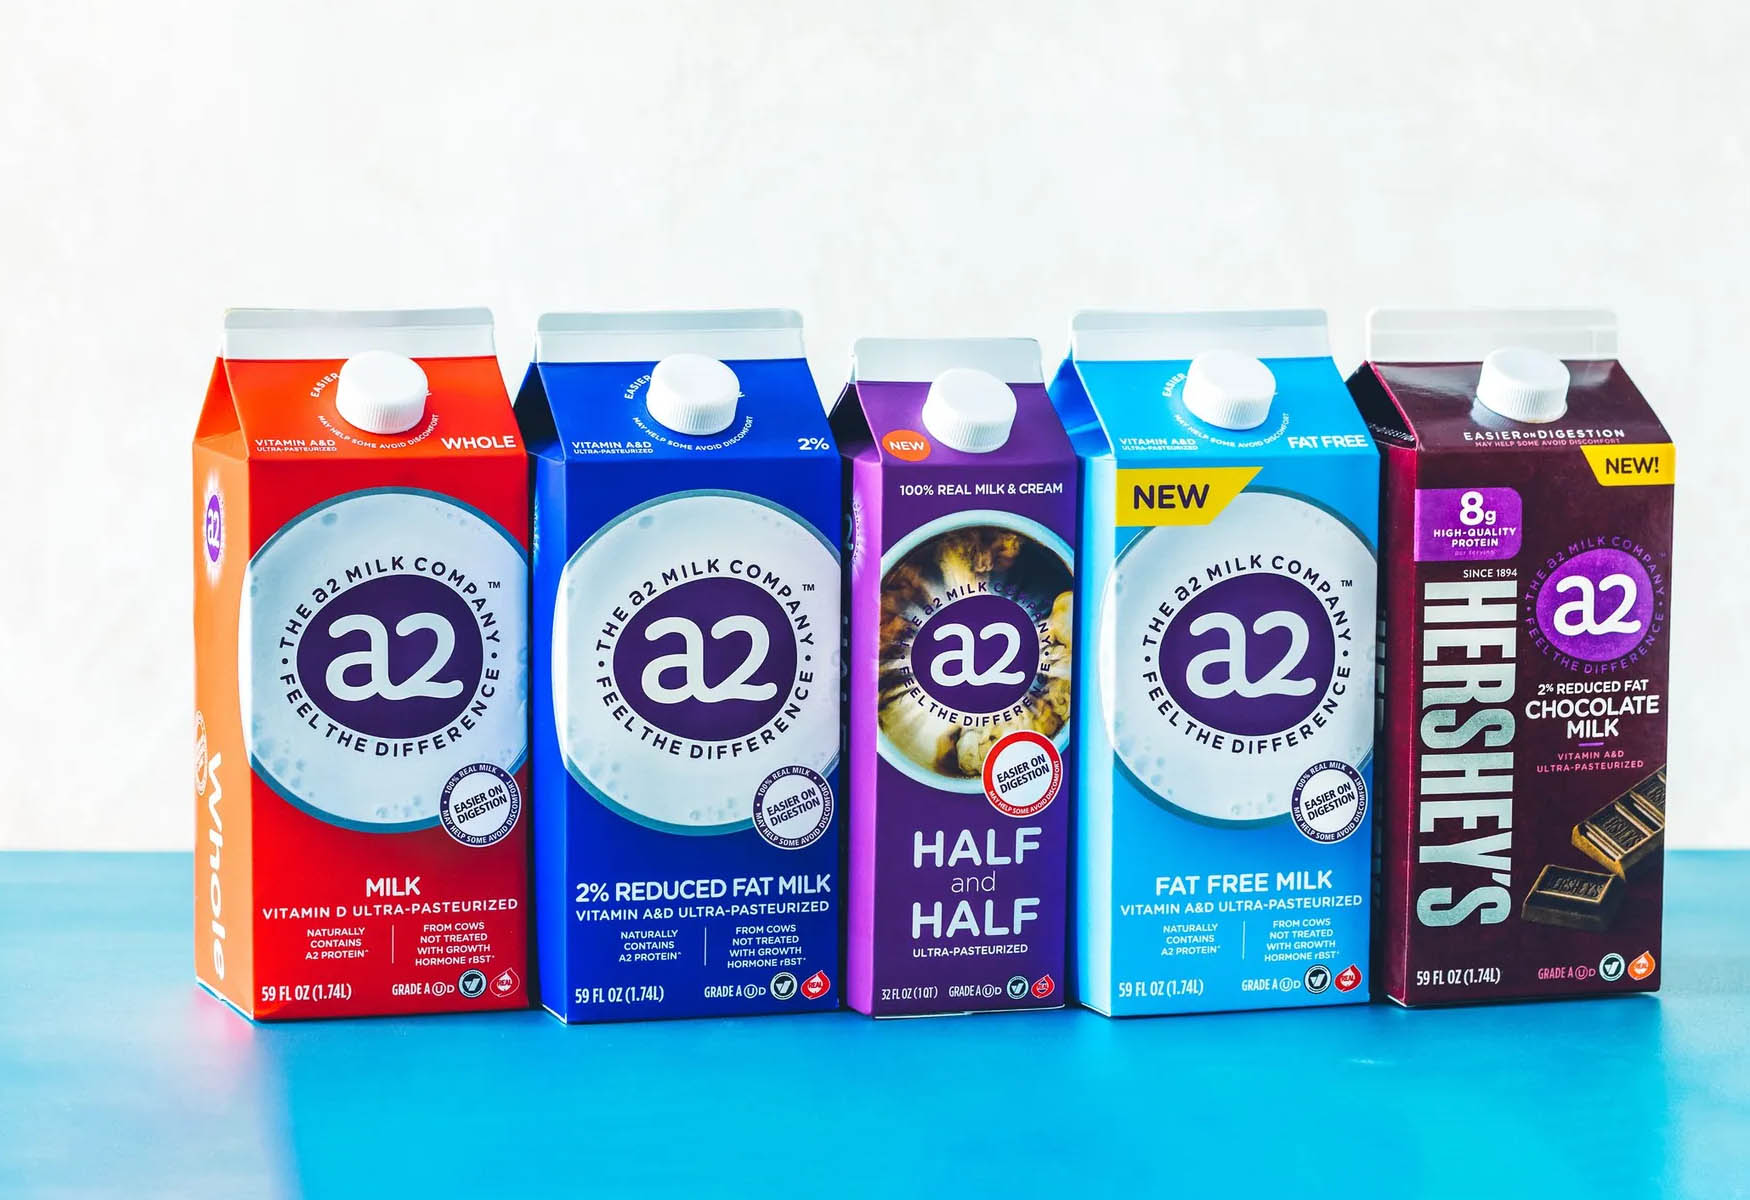 15 A2 Milk Nutrition Facts - Facts.net